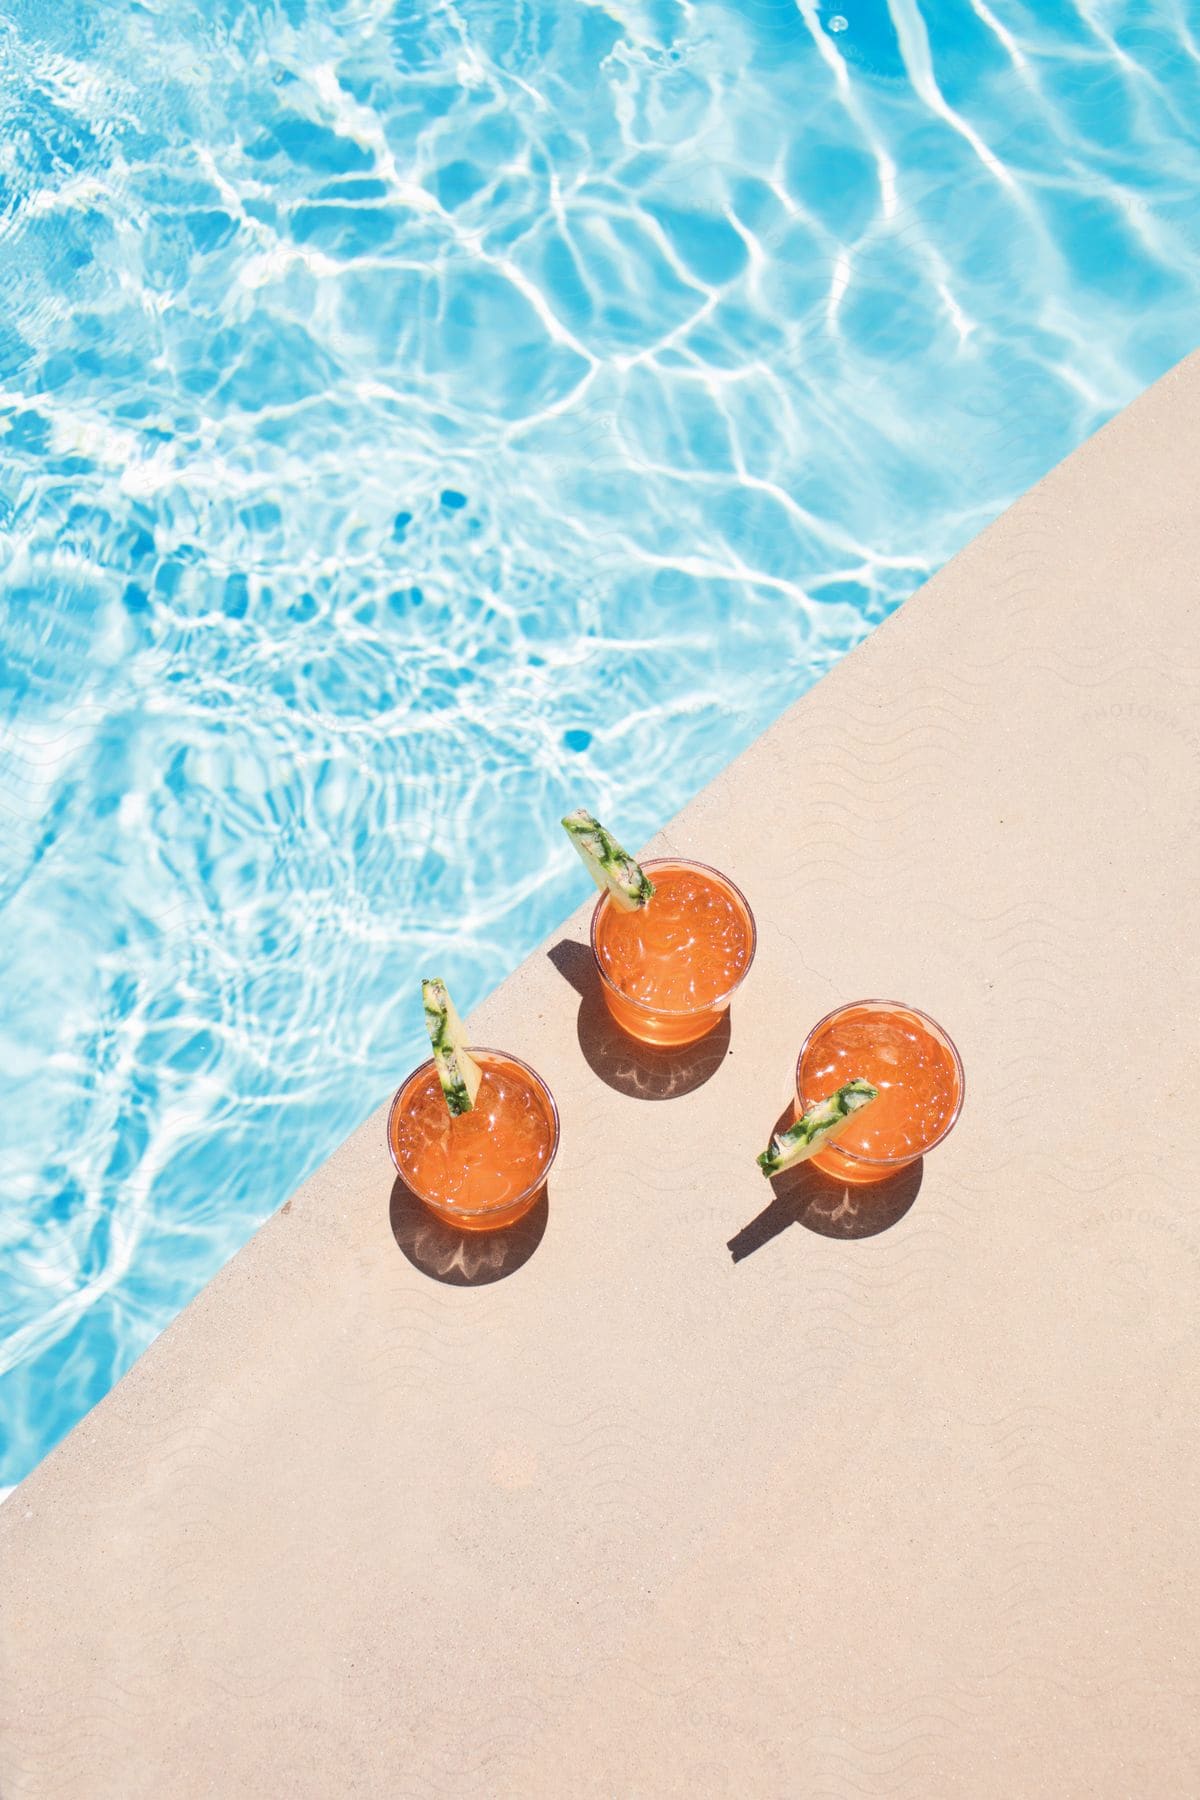 Stock photo of three cocktails by a pool